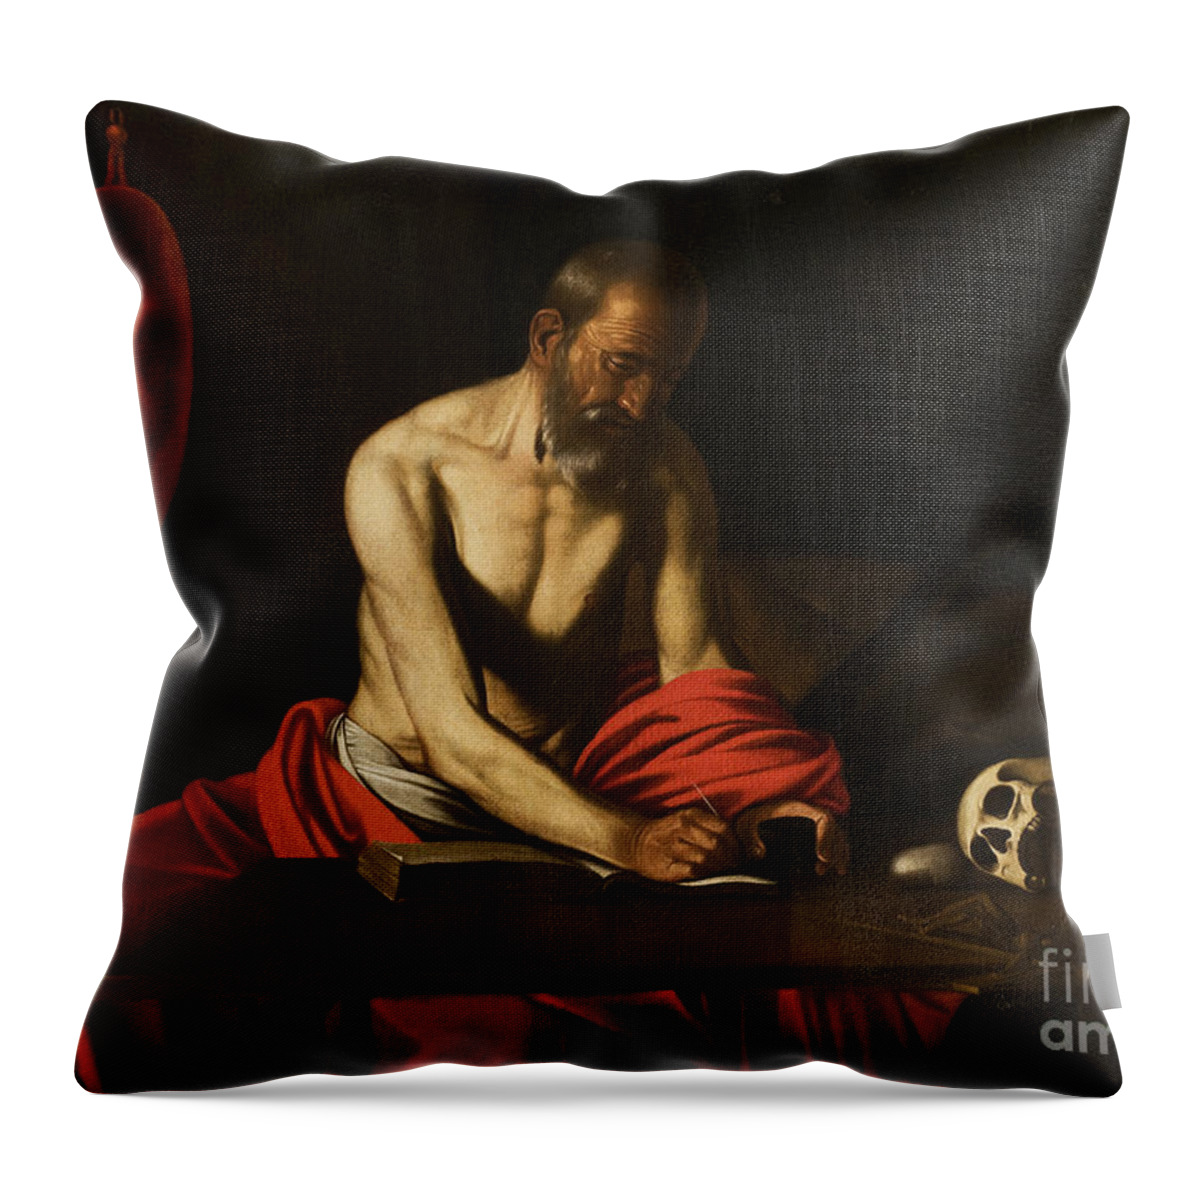 Saint Jerome Throw Pillow featuring the painting Saint Jerome, 1607 by Caravaggio